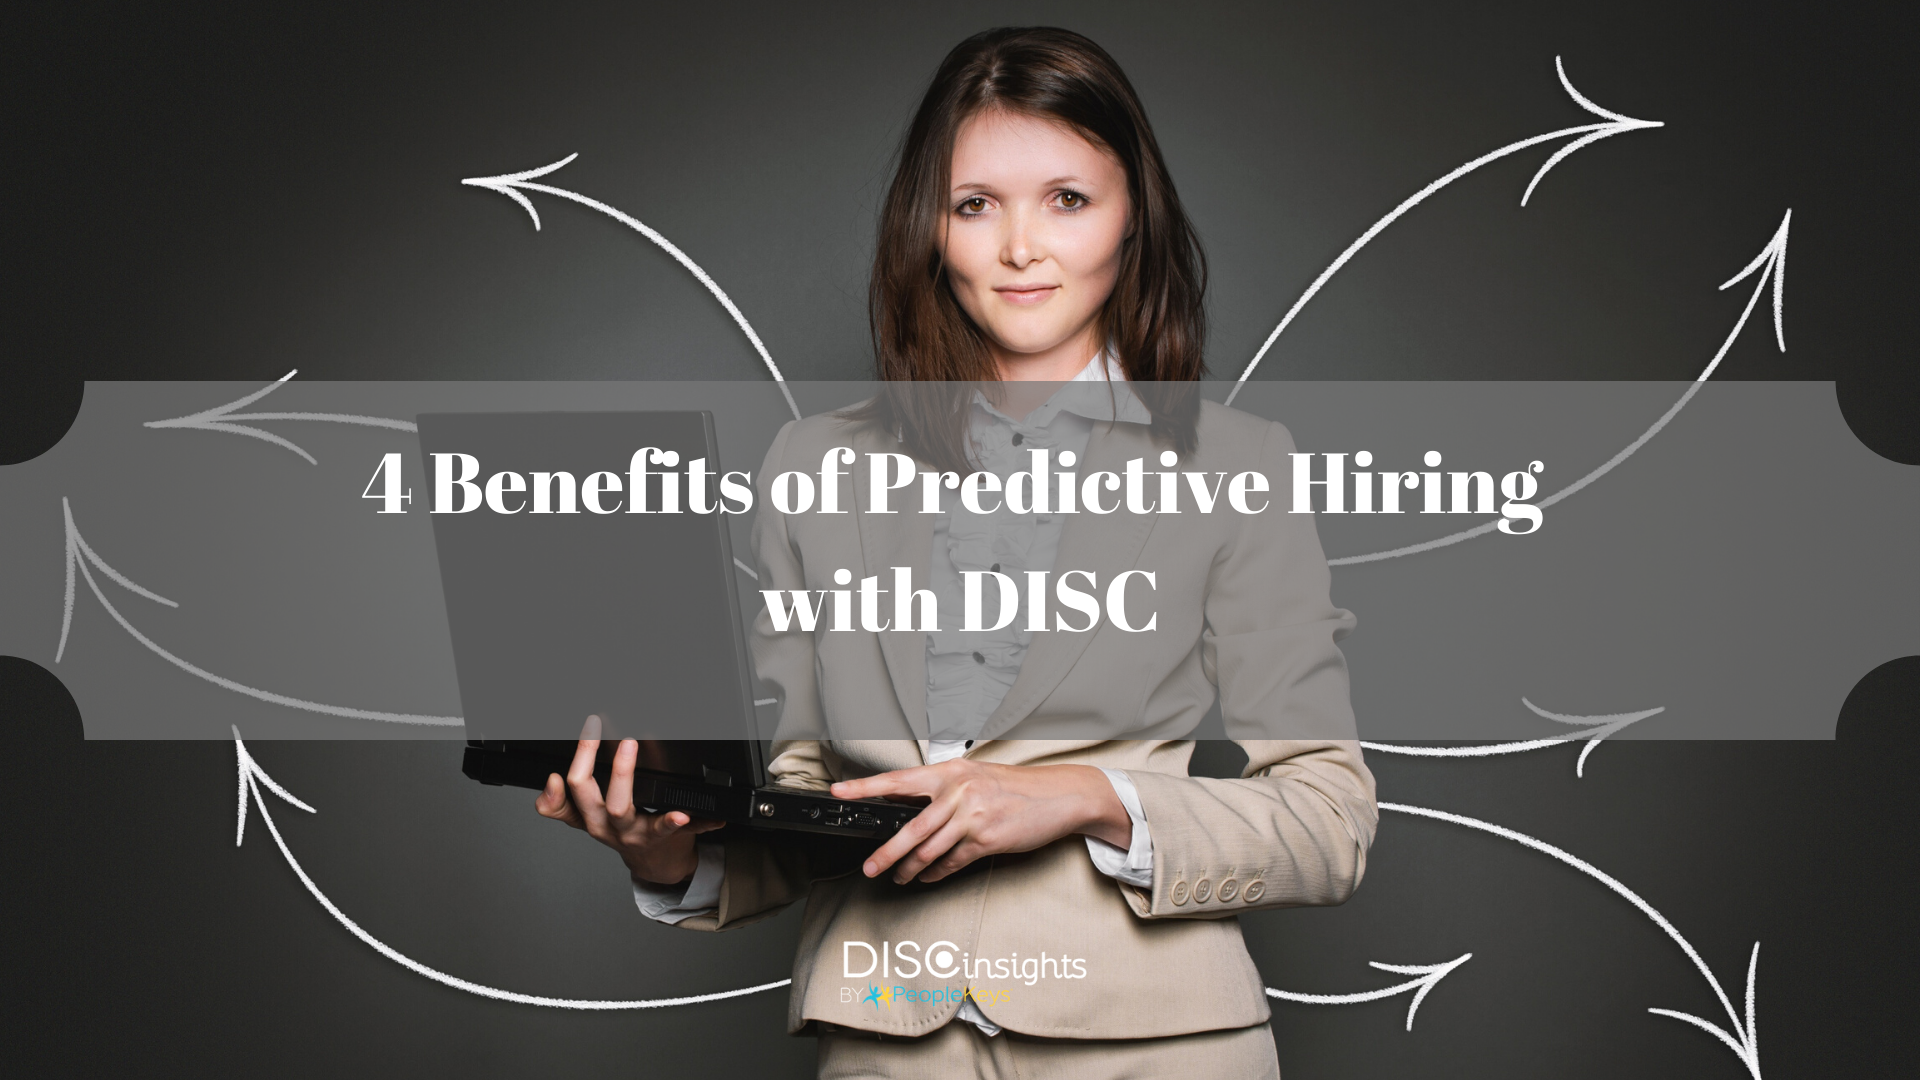 4 Benefits of Predictive Hiring with DISC